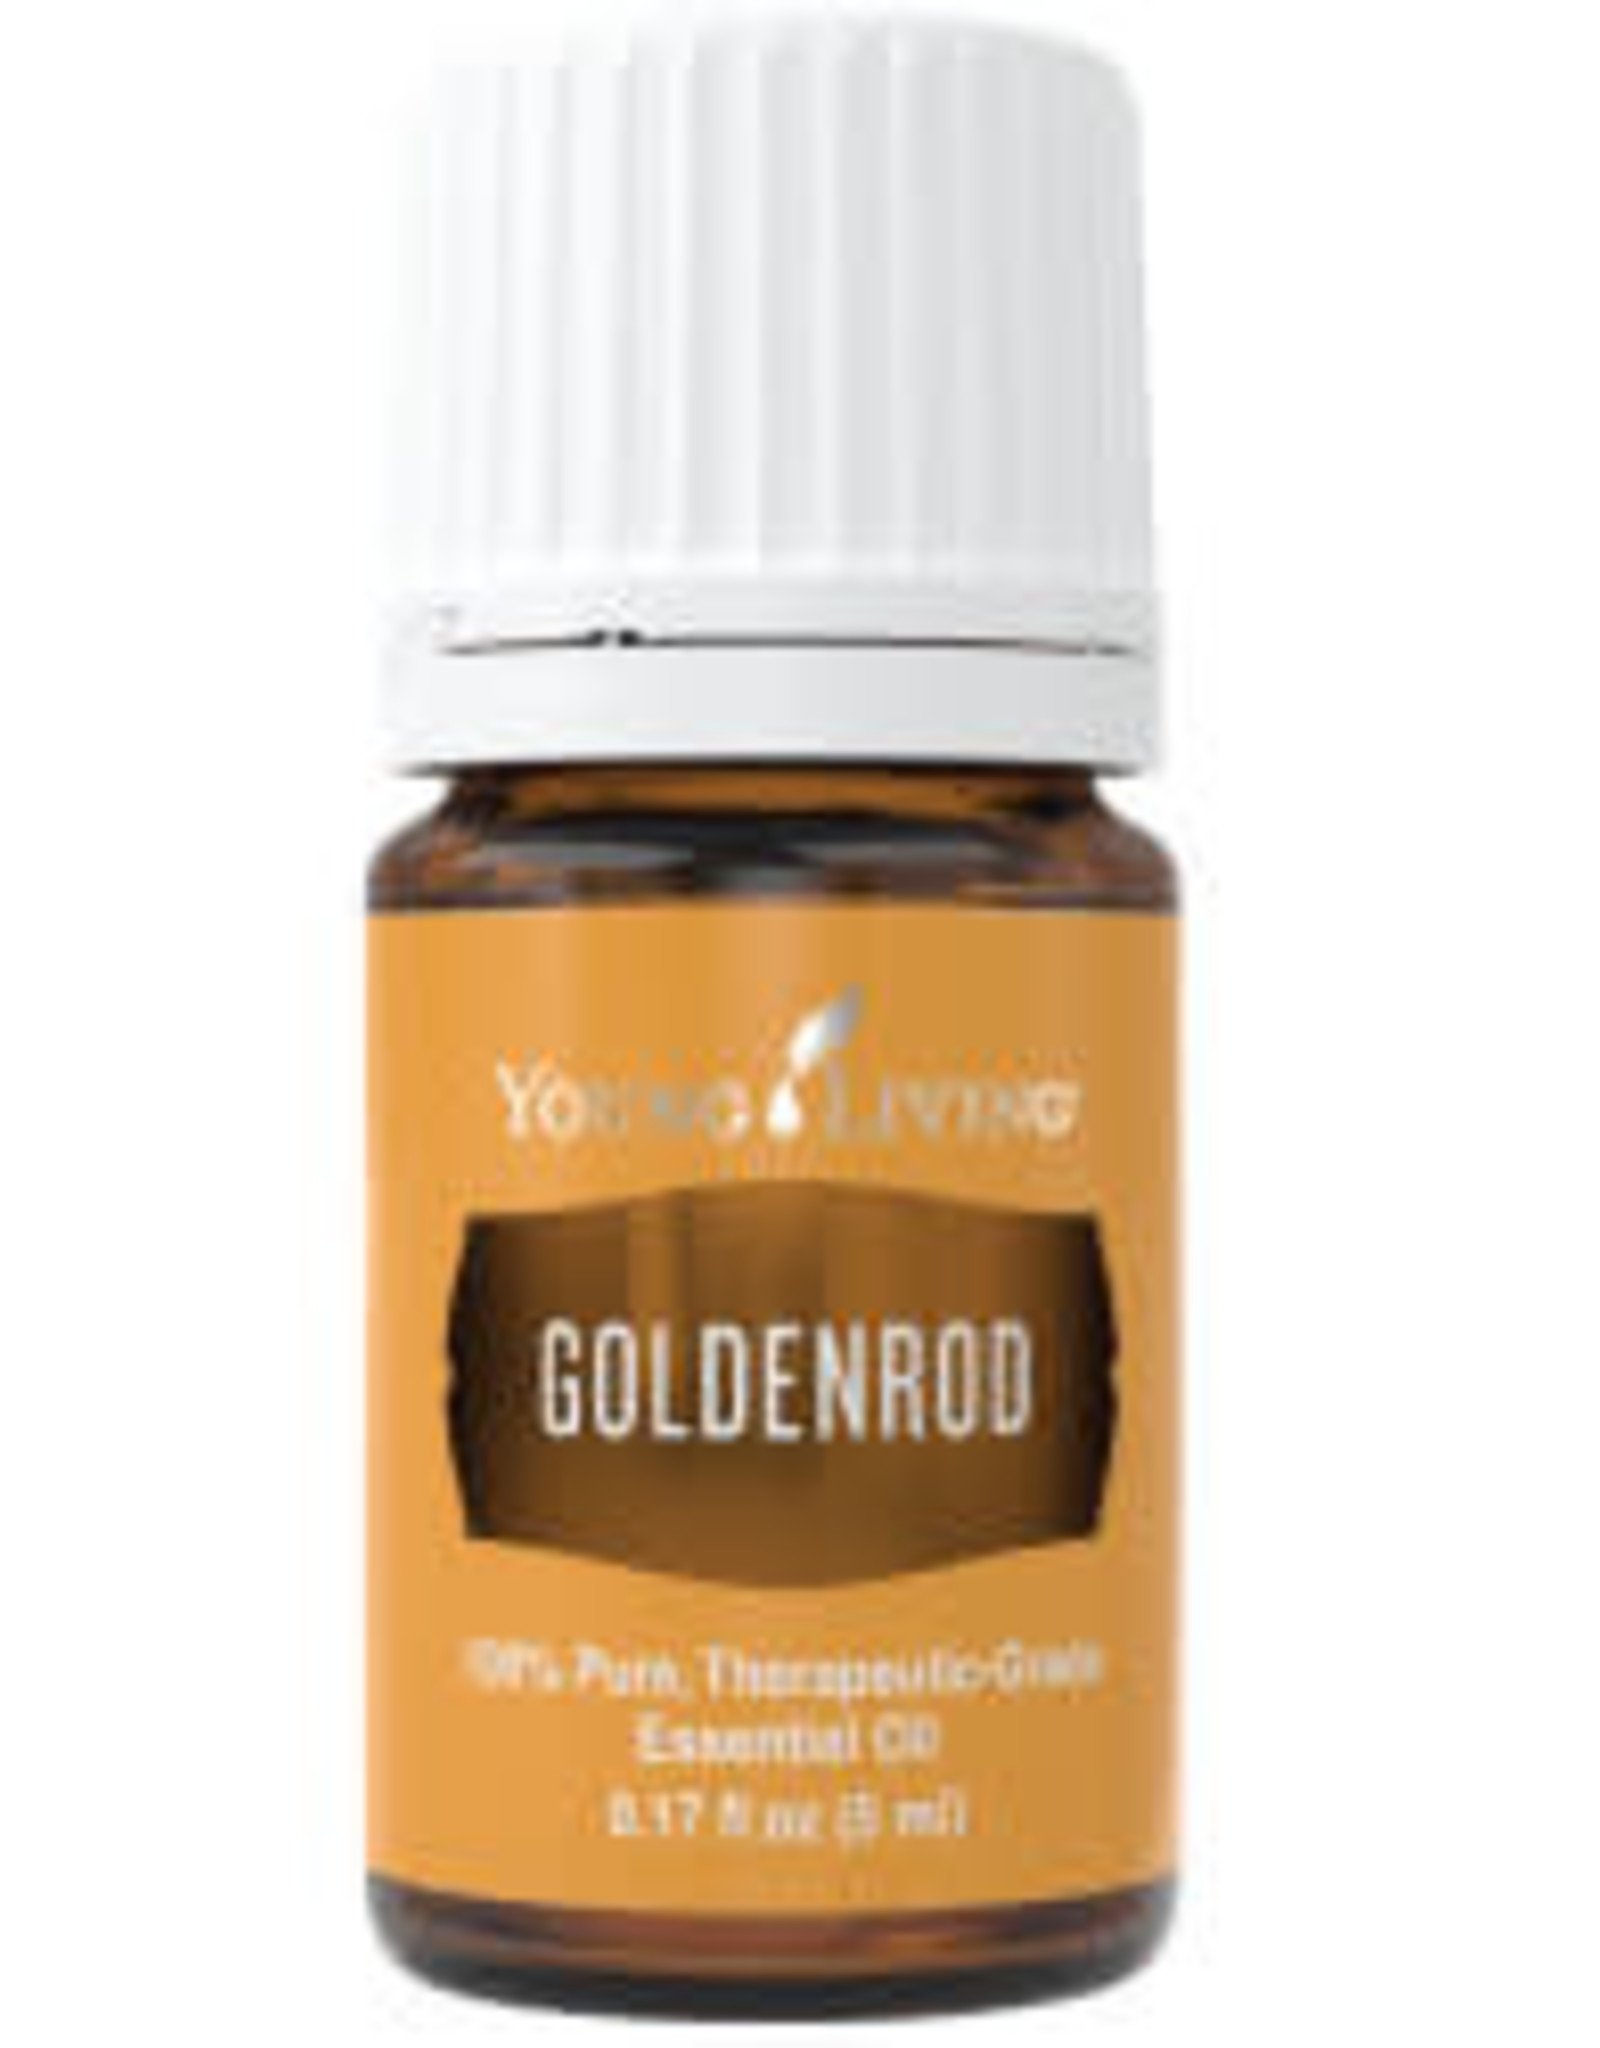 Young Living Goldenrod Oil